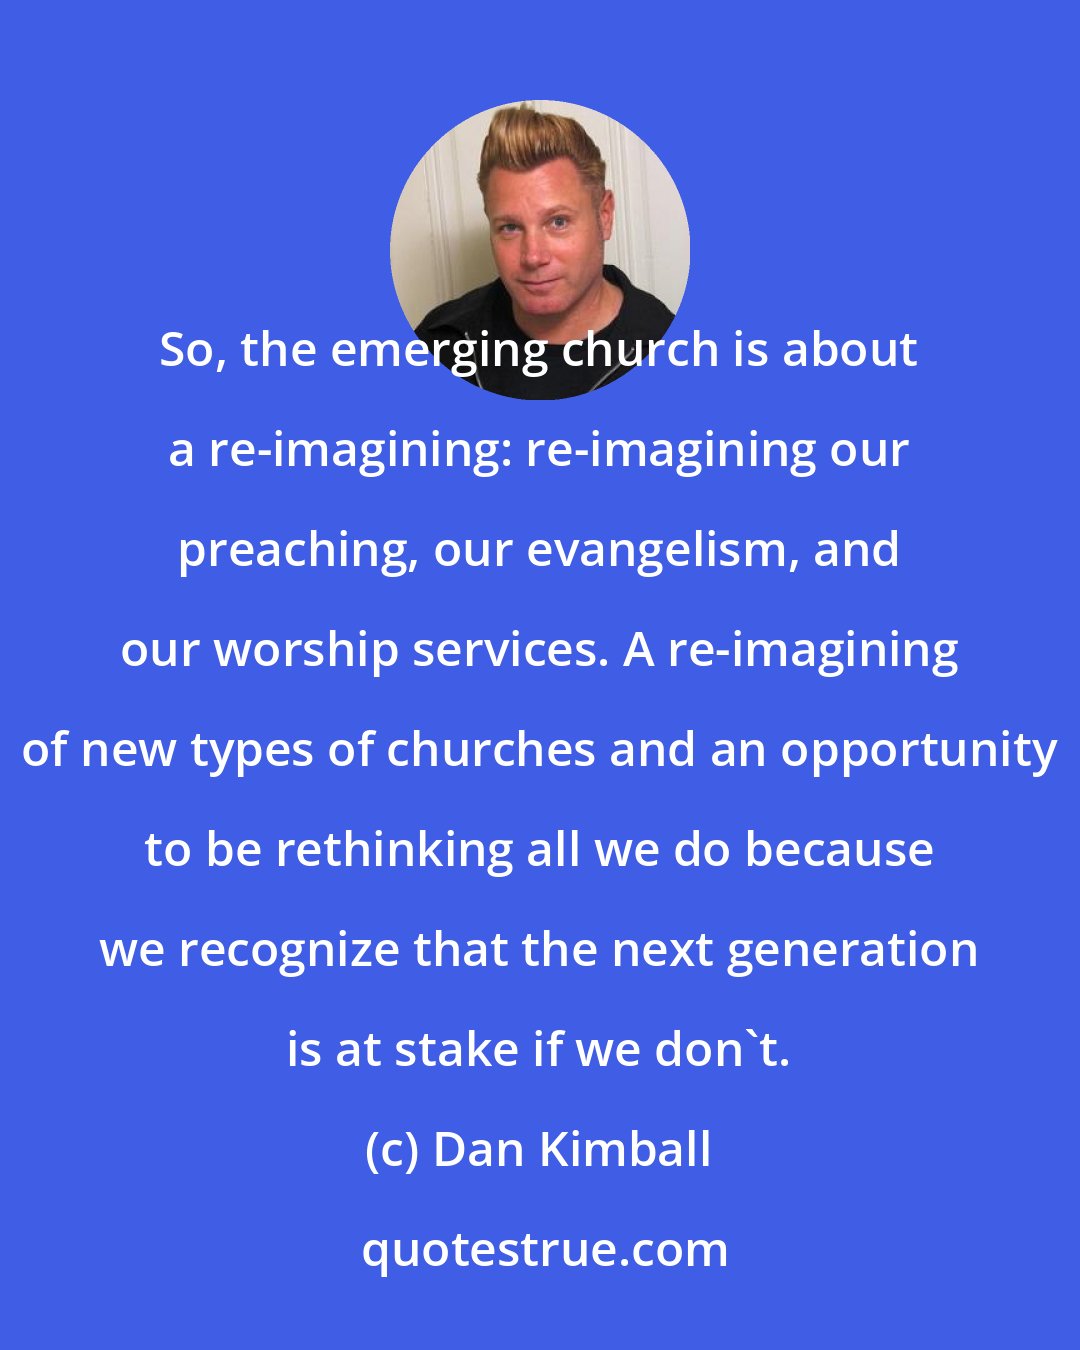 Dan Kimball: So, the emerging church is about a re-imagining: re-imagining our preaching, our evangelism, and our worship services. A re-imagining of new types of churches and an opportunity to be rethinking all we do because we recognize that the next generation is at stake if we don't.